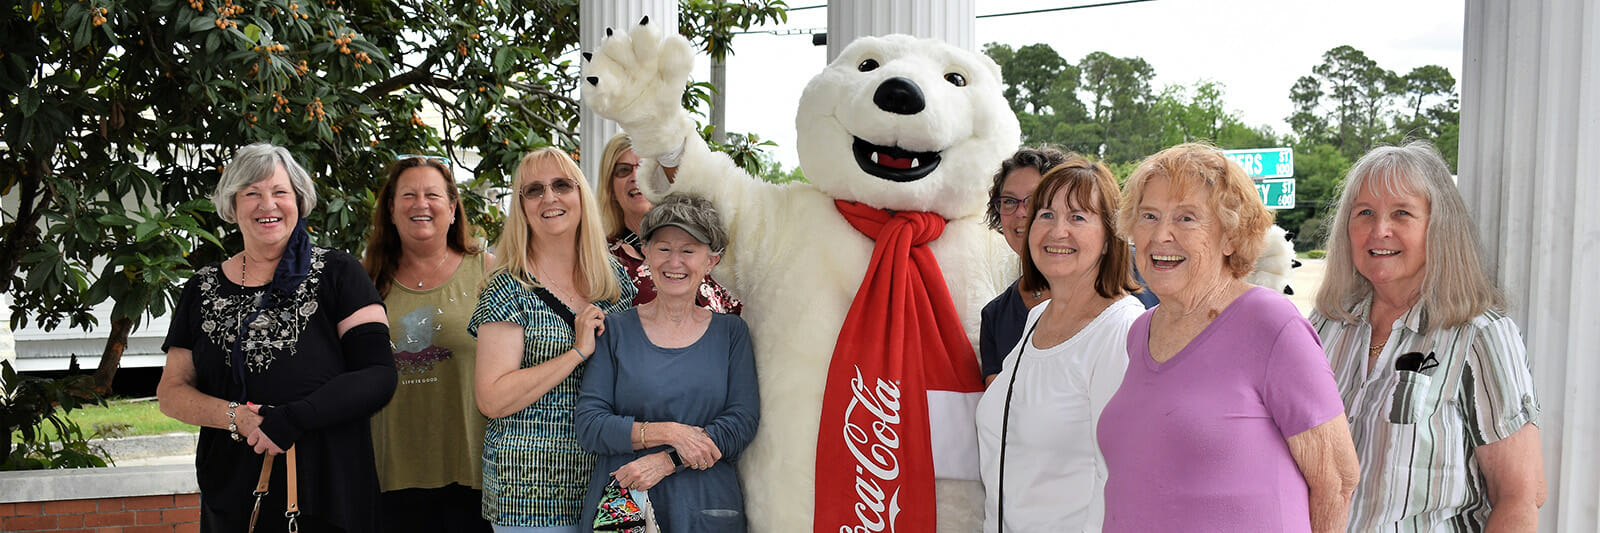 people smiling with bear mascot